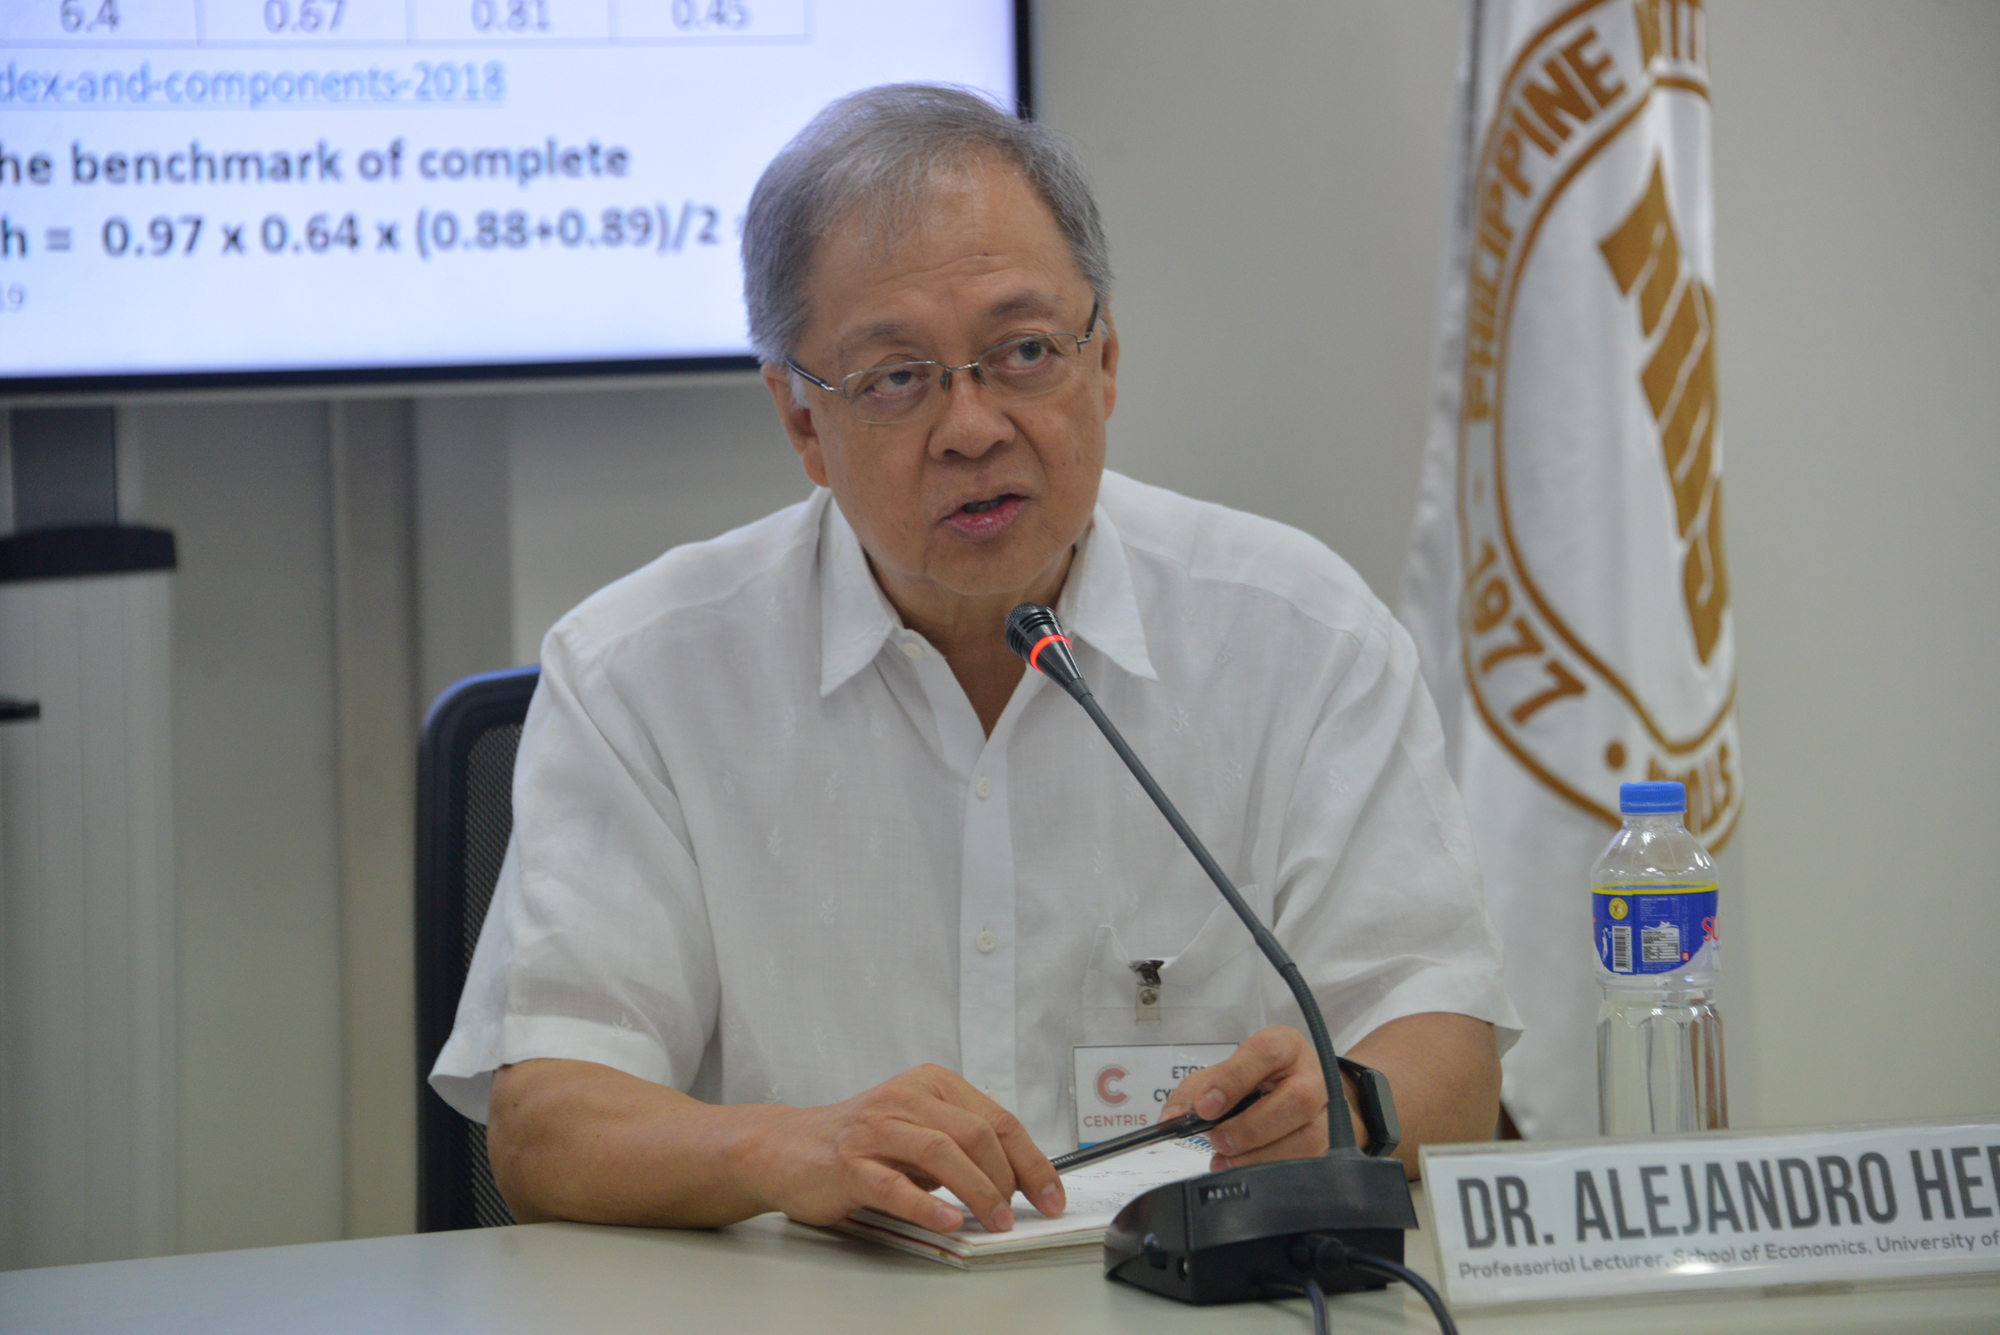 Public Seminar on Poverty and Child Stunting-pids-poverty-16-20190725.jpg